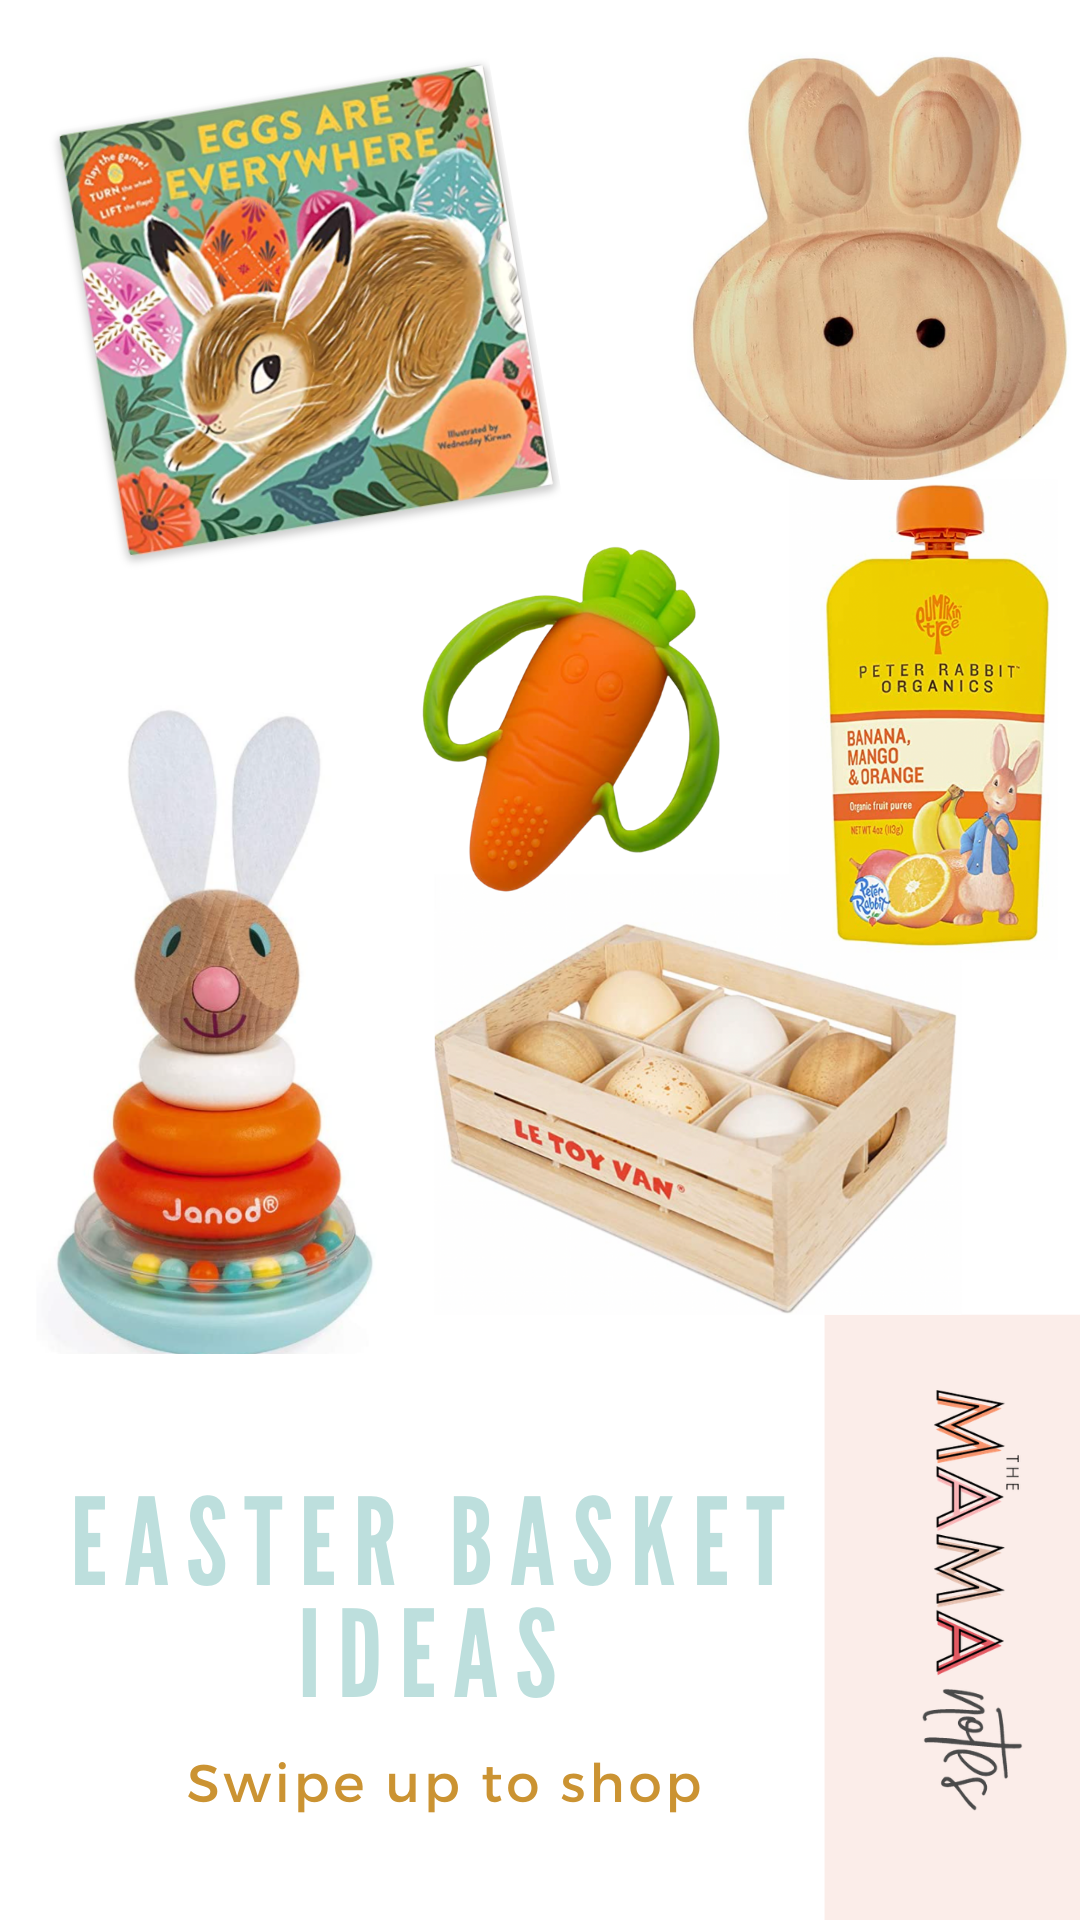 20 Easter Basket Fillers From ! - The Mama Notes